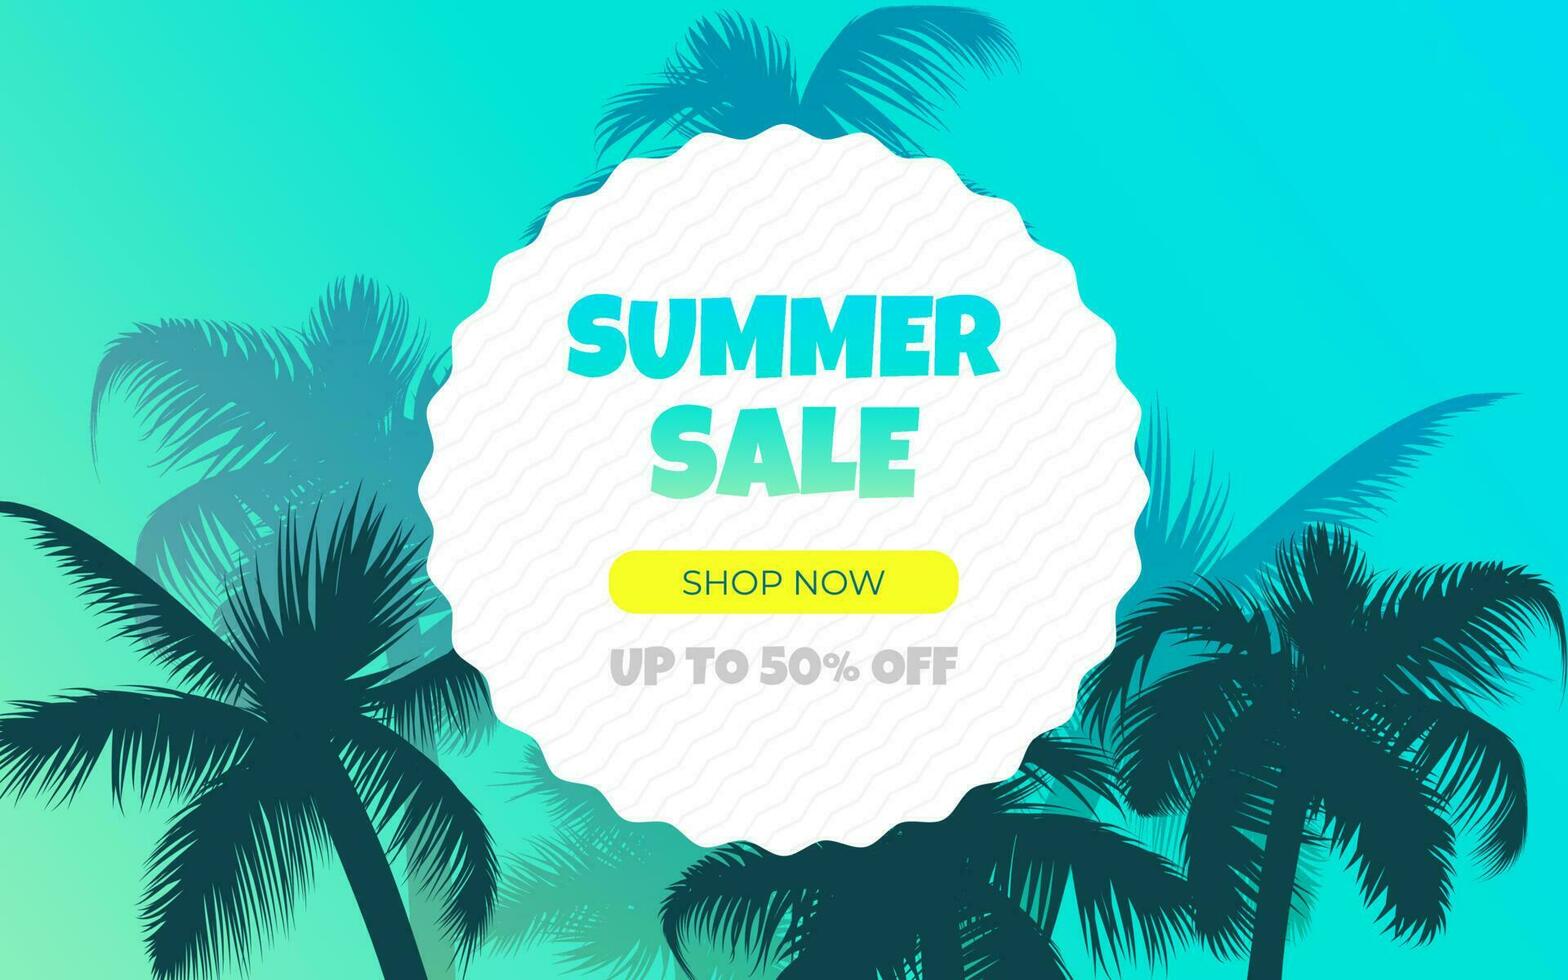 Summer sale. Tropical illustration featuring leaf pattern, palm trees, and zig zag circle on blue gradient background ideal for summer sale promotion flyers, posters and templates vector